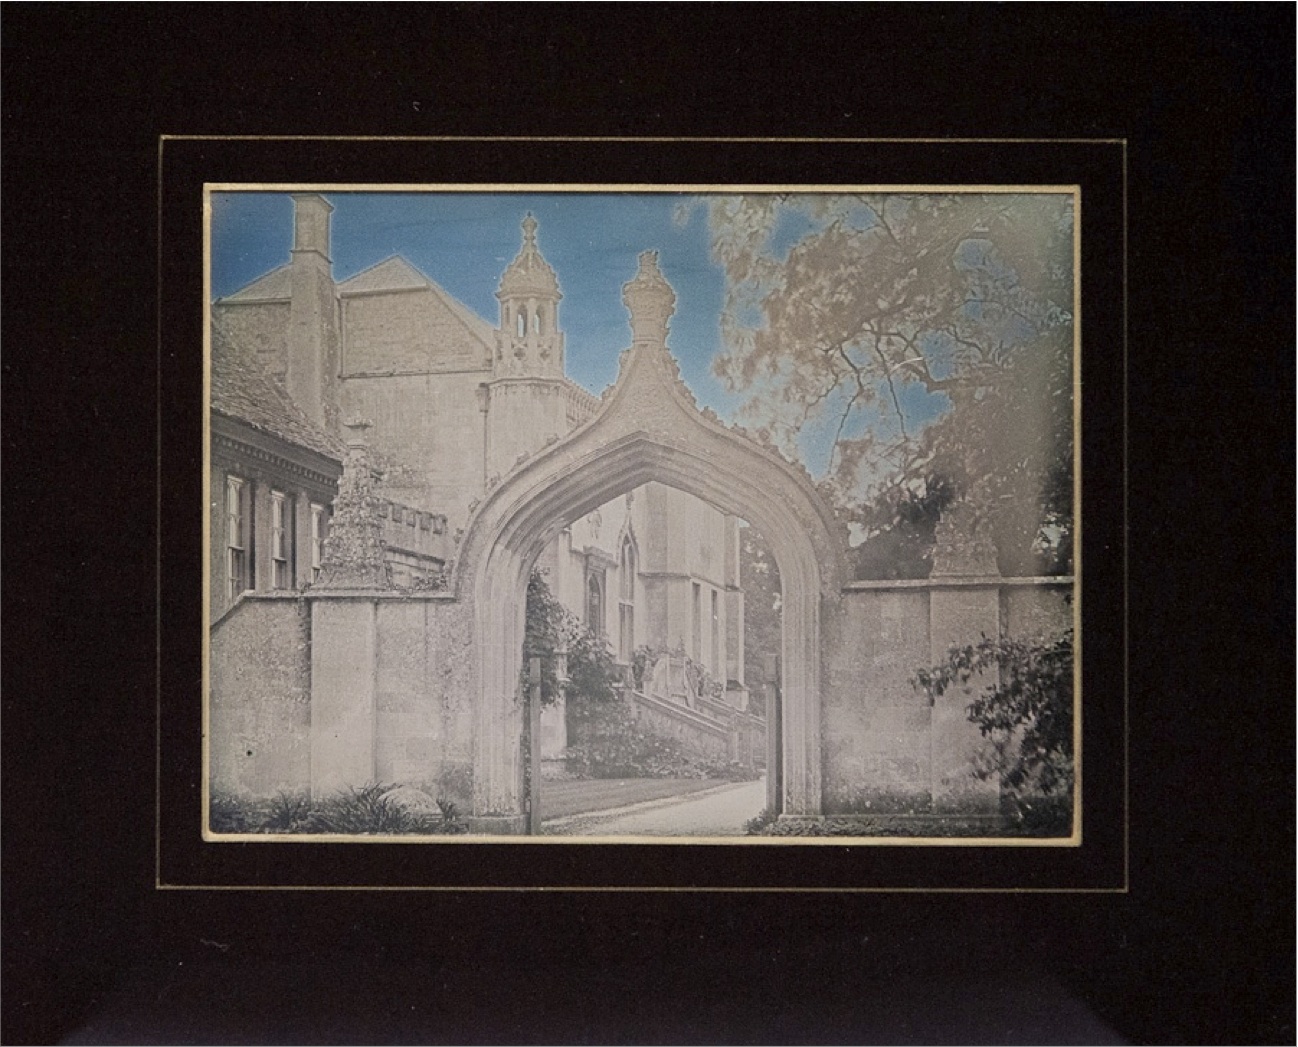 Mike Robinson - The Gate at Lacock Abbey